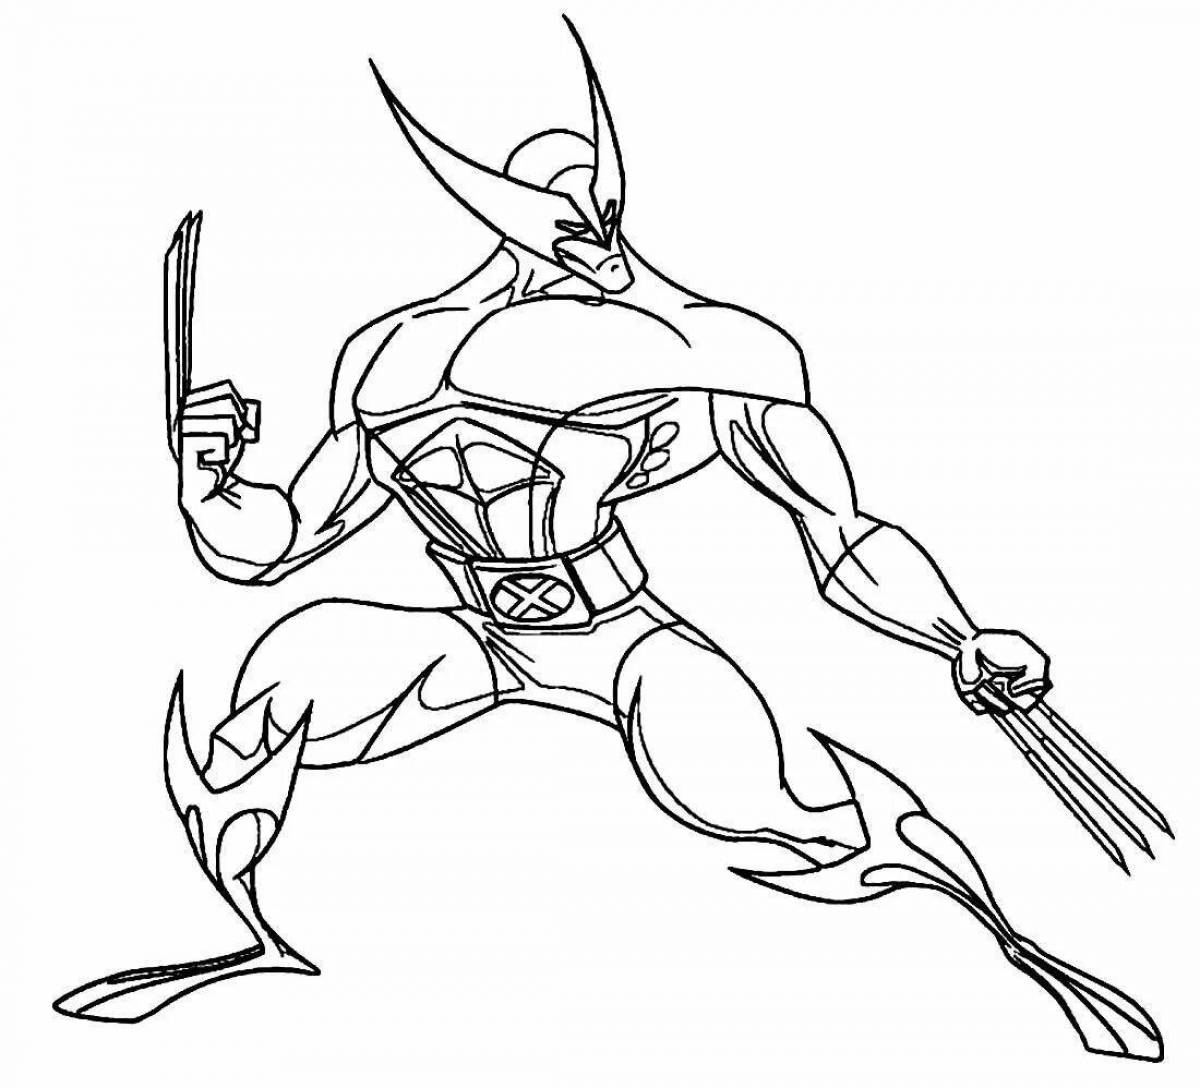 Exalted marvel wolverine coloring book